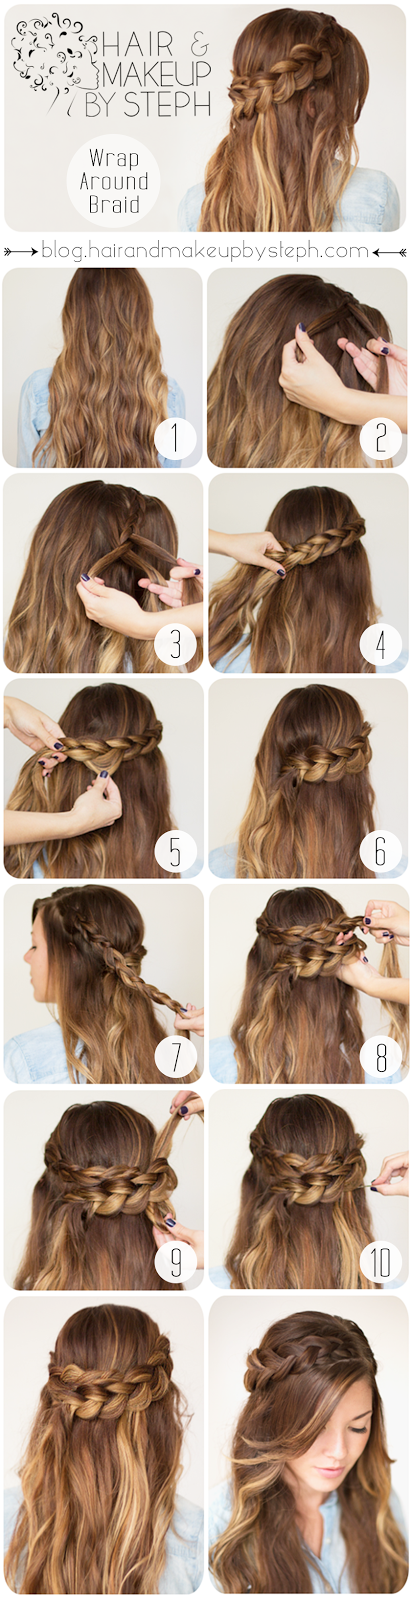 cute-and-easy-braided-hairstyles-41 Cute and easy braided hairstyles